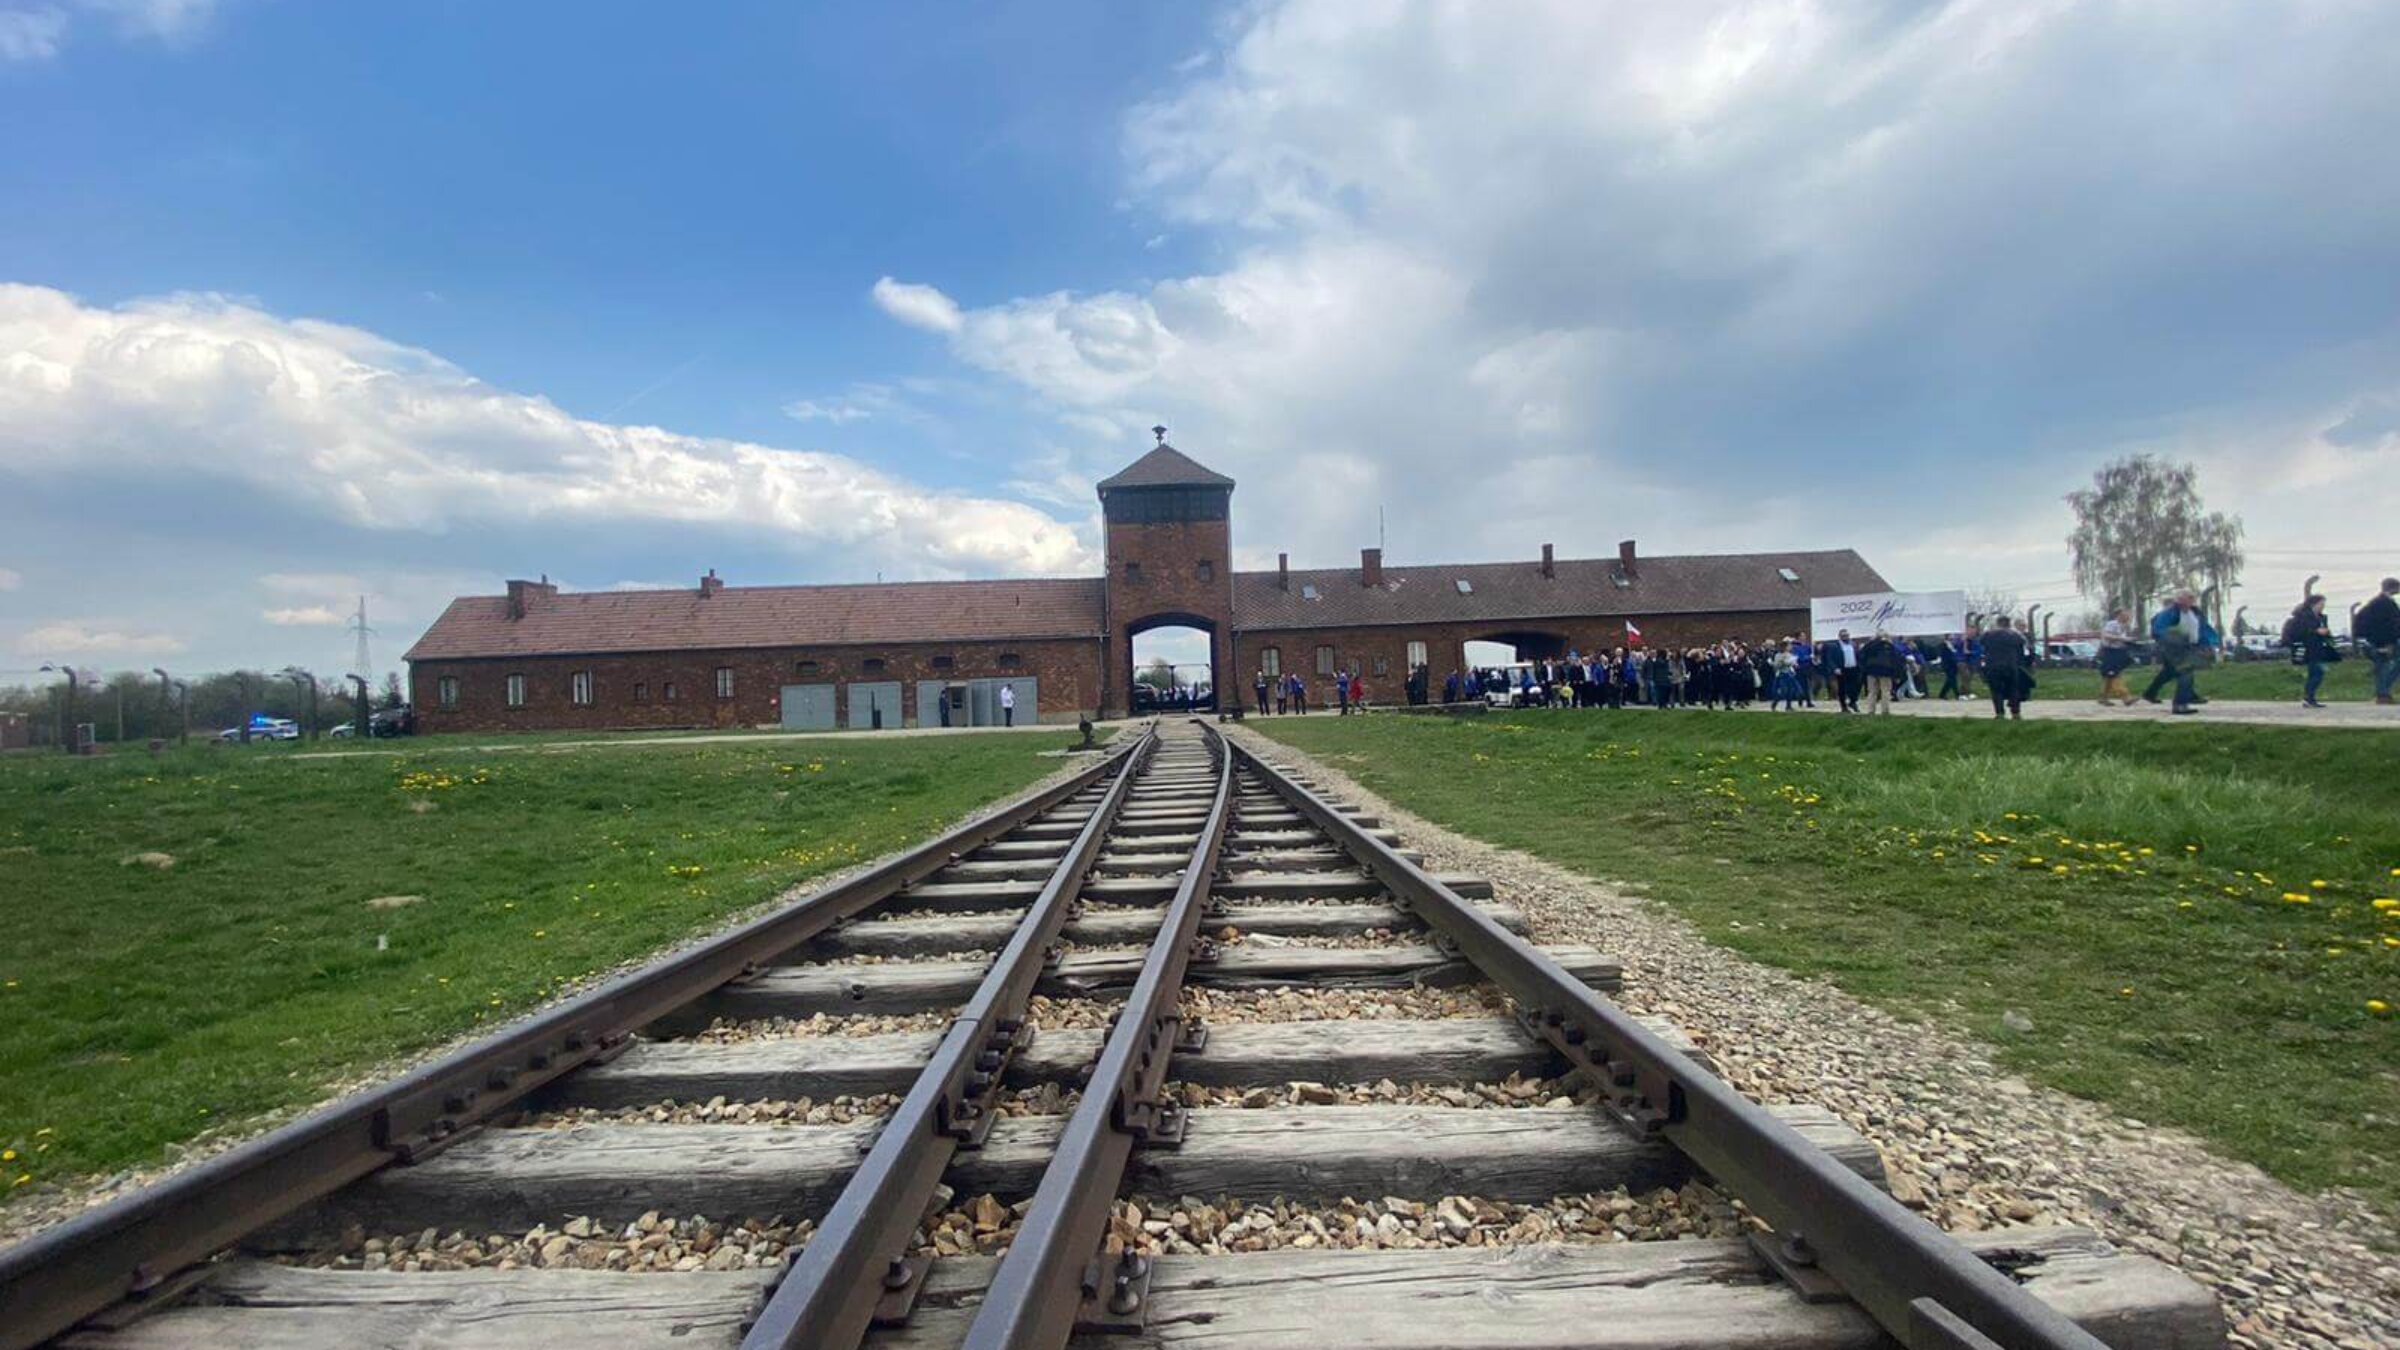 The train tracks leading from Auschwitz, the Holocaust concentration camp